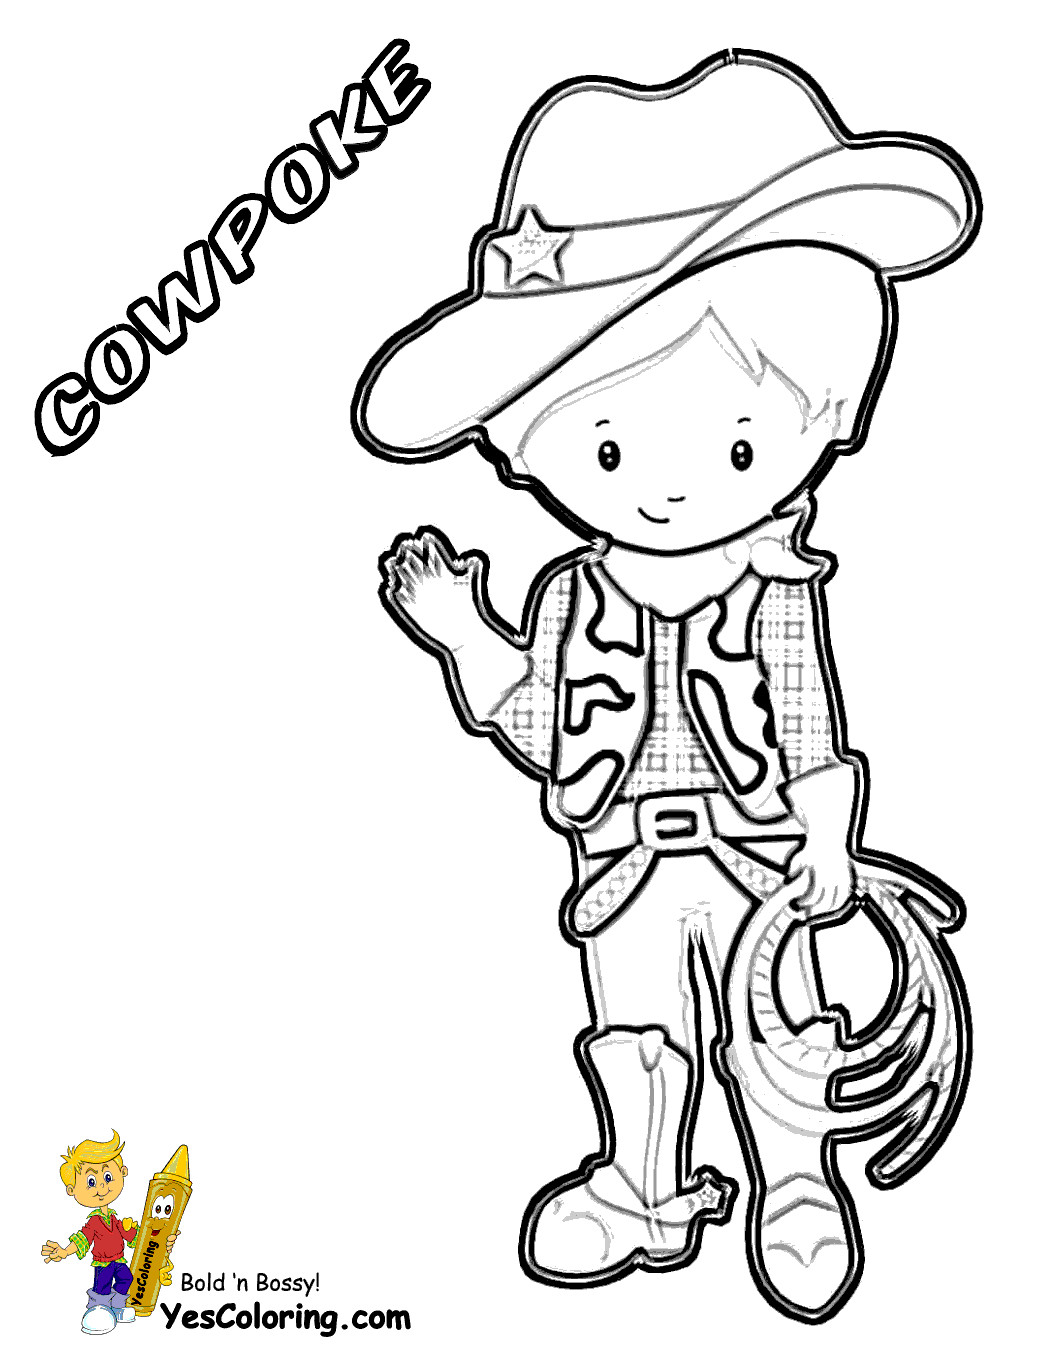 Cowboy Coloring Pages
 Ride em Cowboy Coloring Free Coloring For Kids